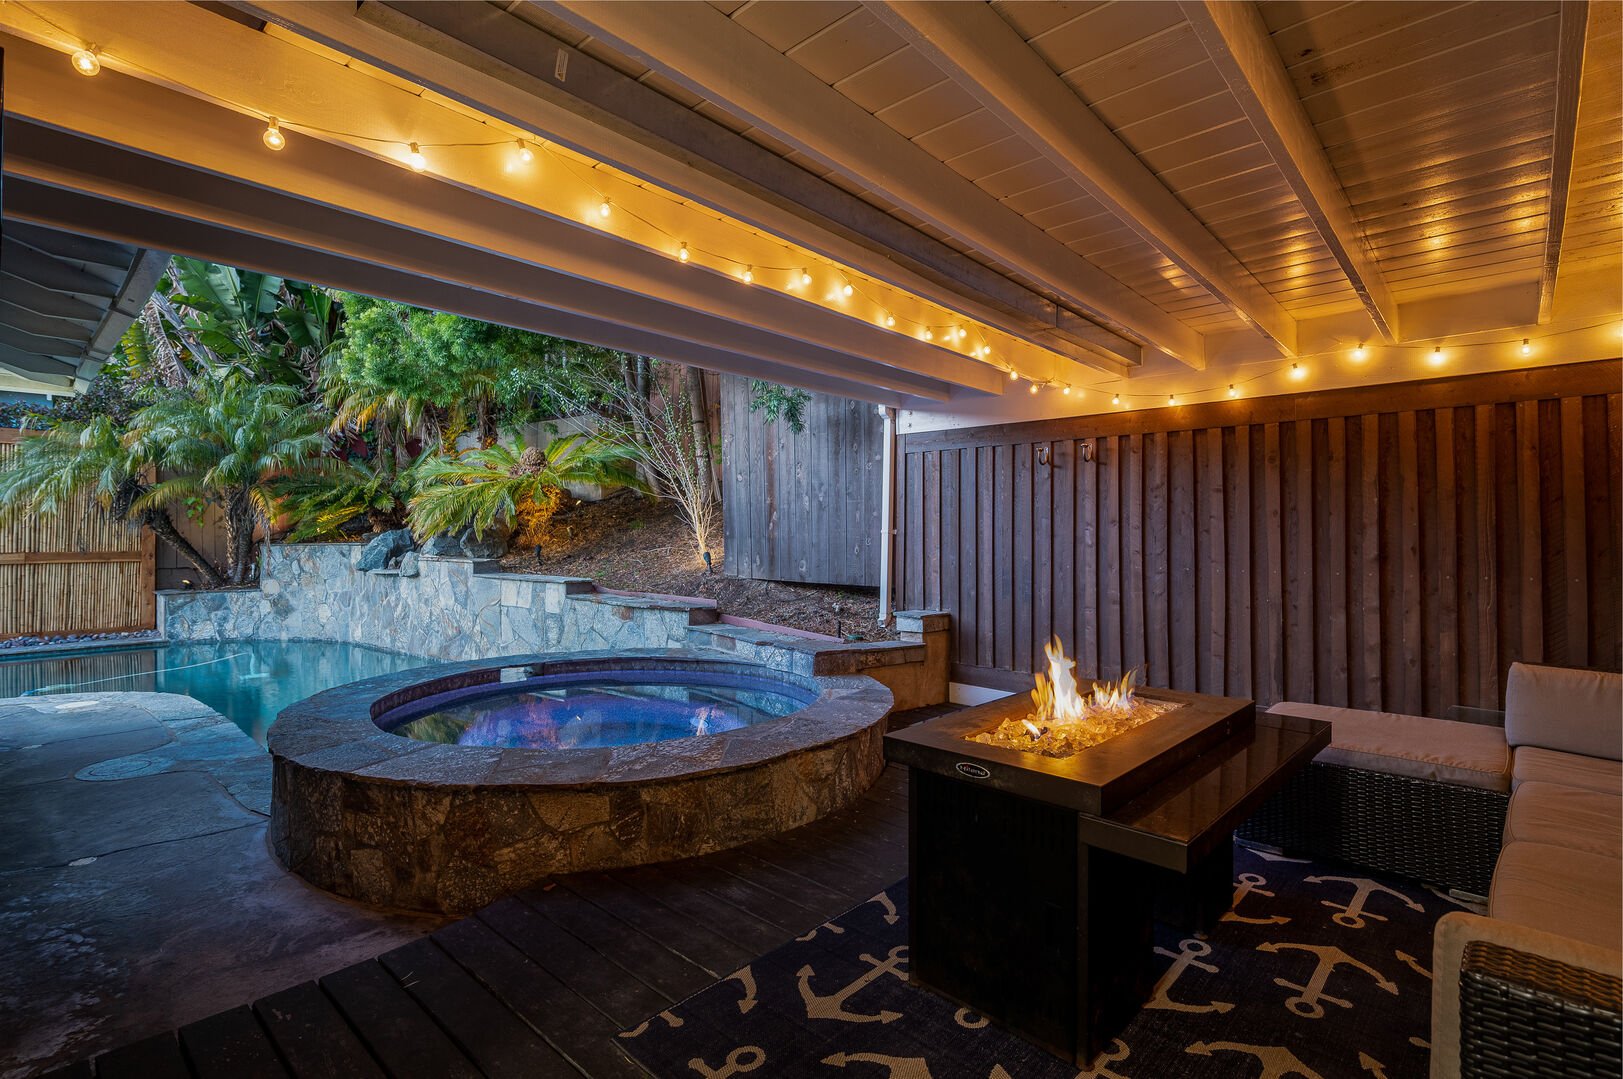 Hot tub next to the pool and fire pit - great spot to unwind after a fun day out!